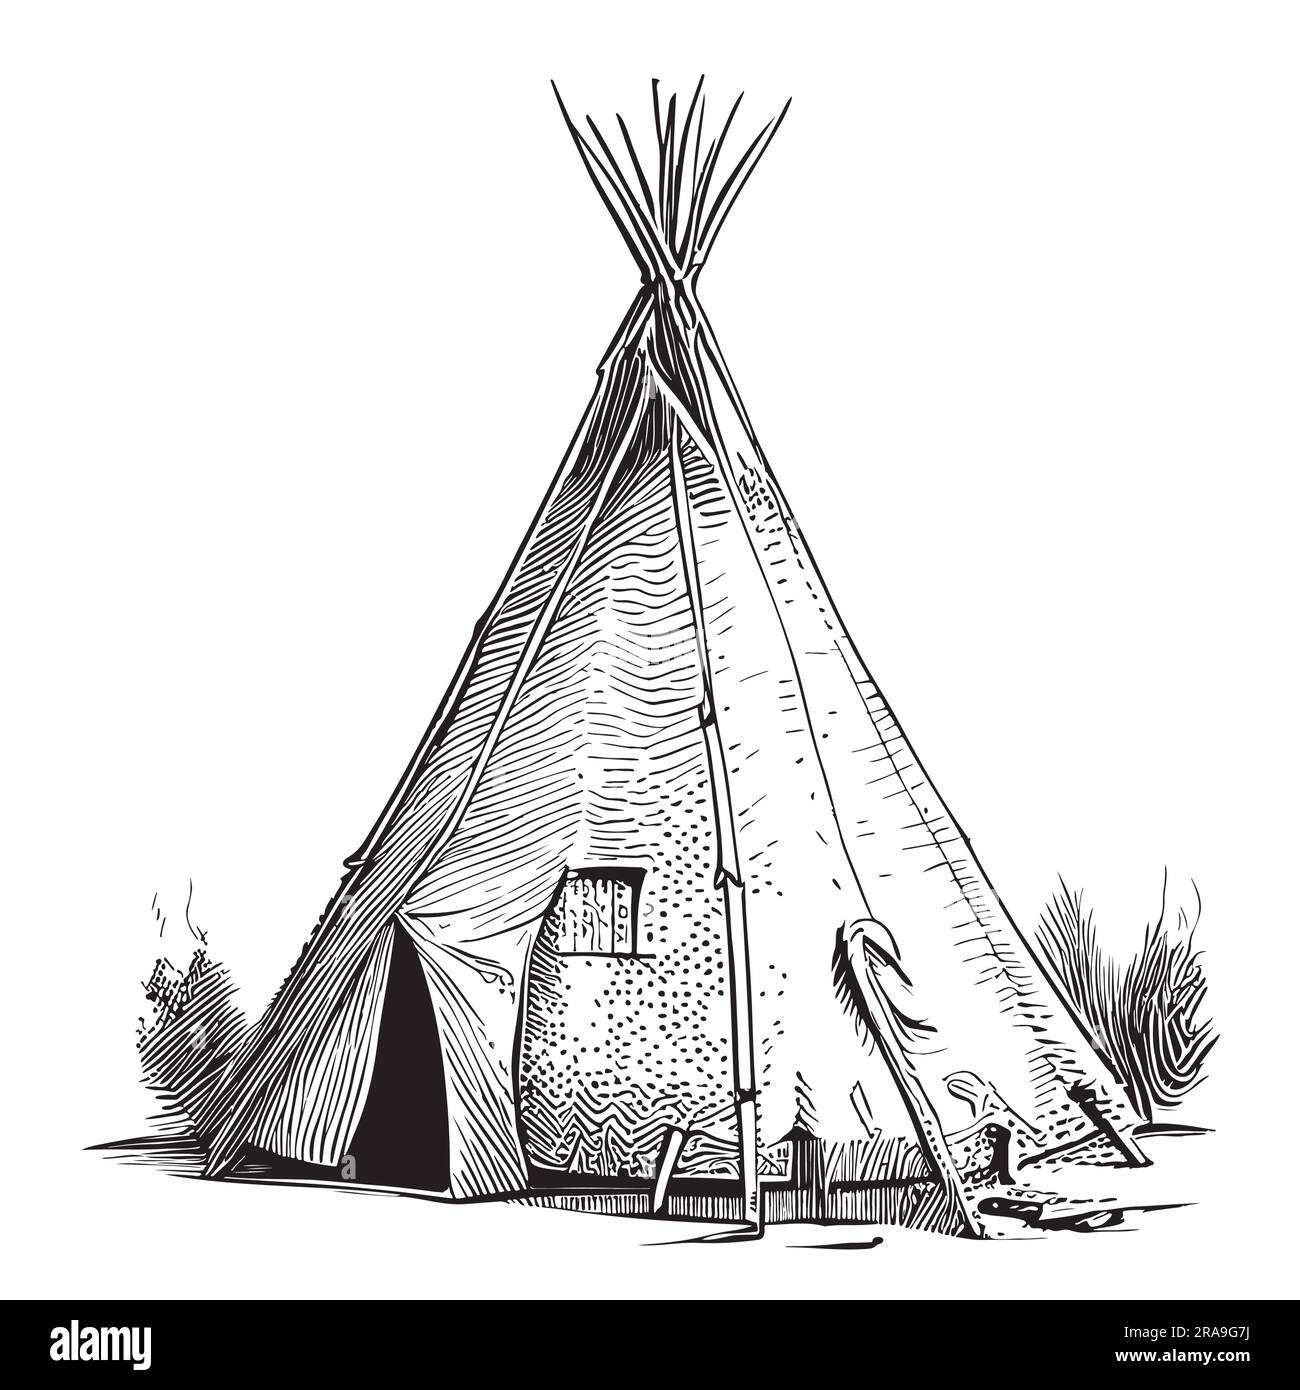 Wigwam sketch hand drawn in doodle style illustration Stock Vector